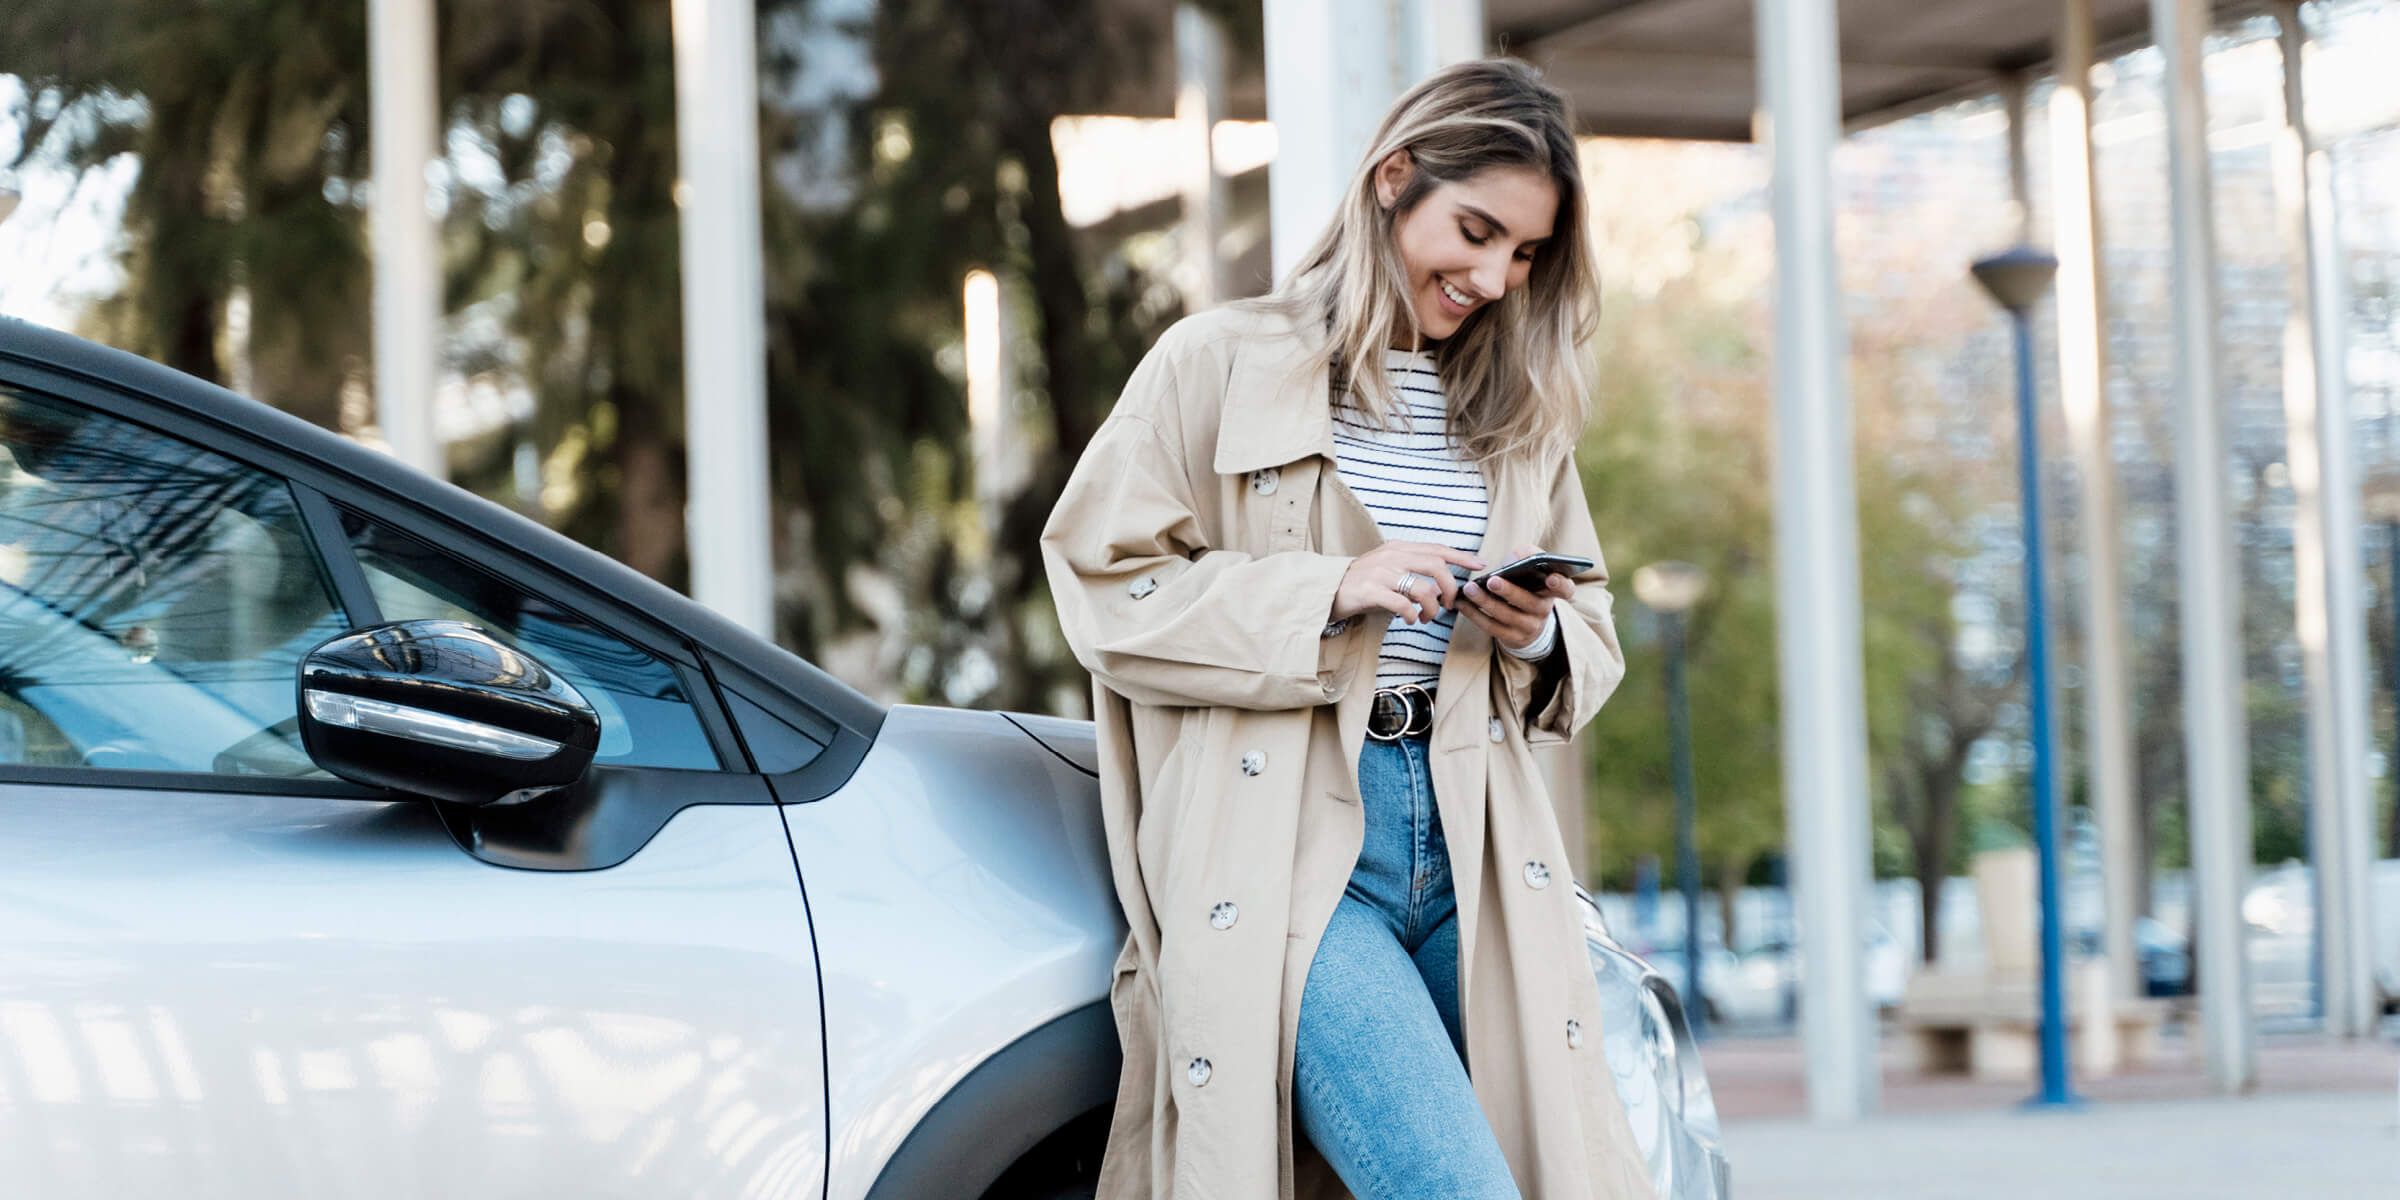 Woman leaning on car smiling and scrolling on phone